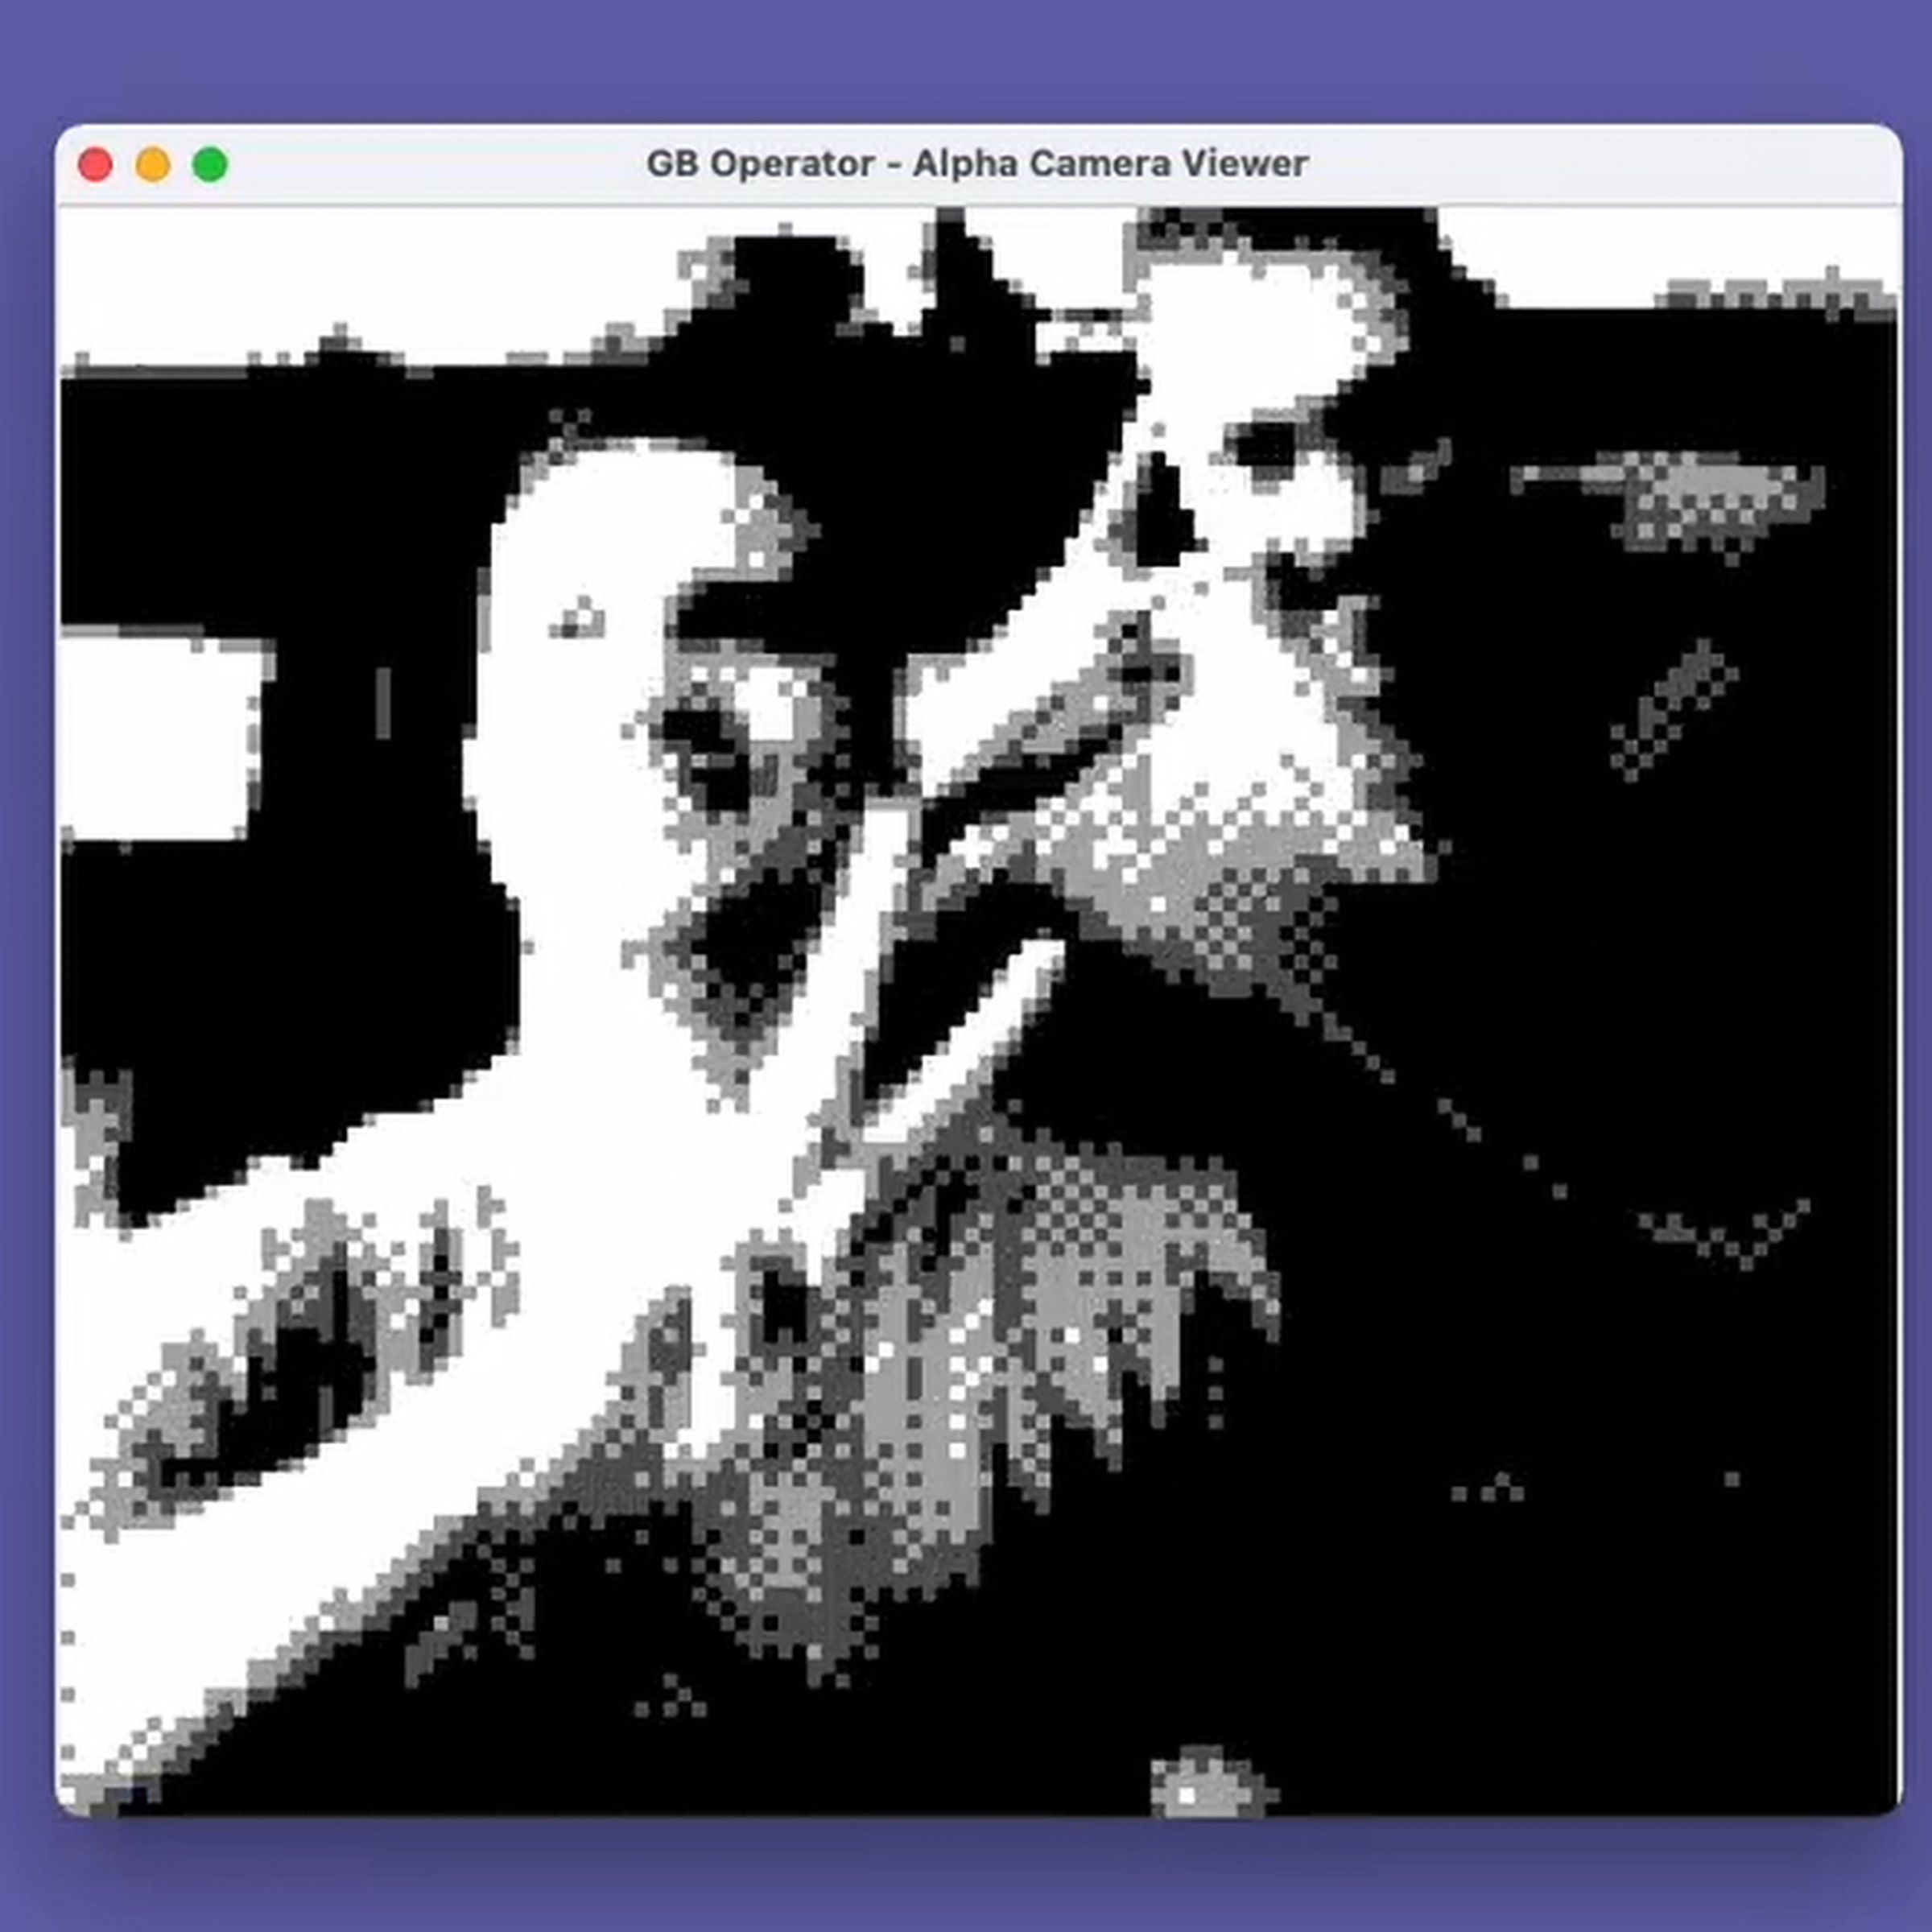 A low-resolution image of two people being livestreamed through the Game Boy Camera.